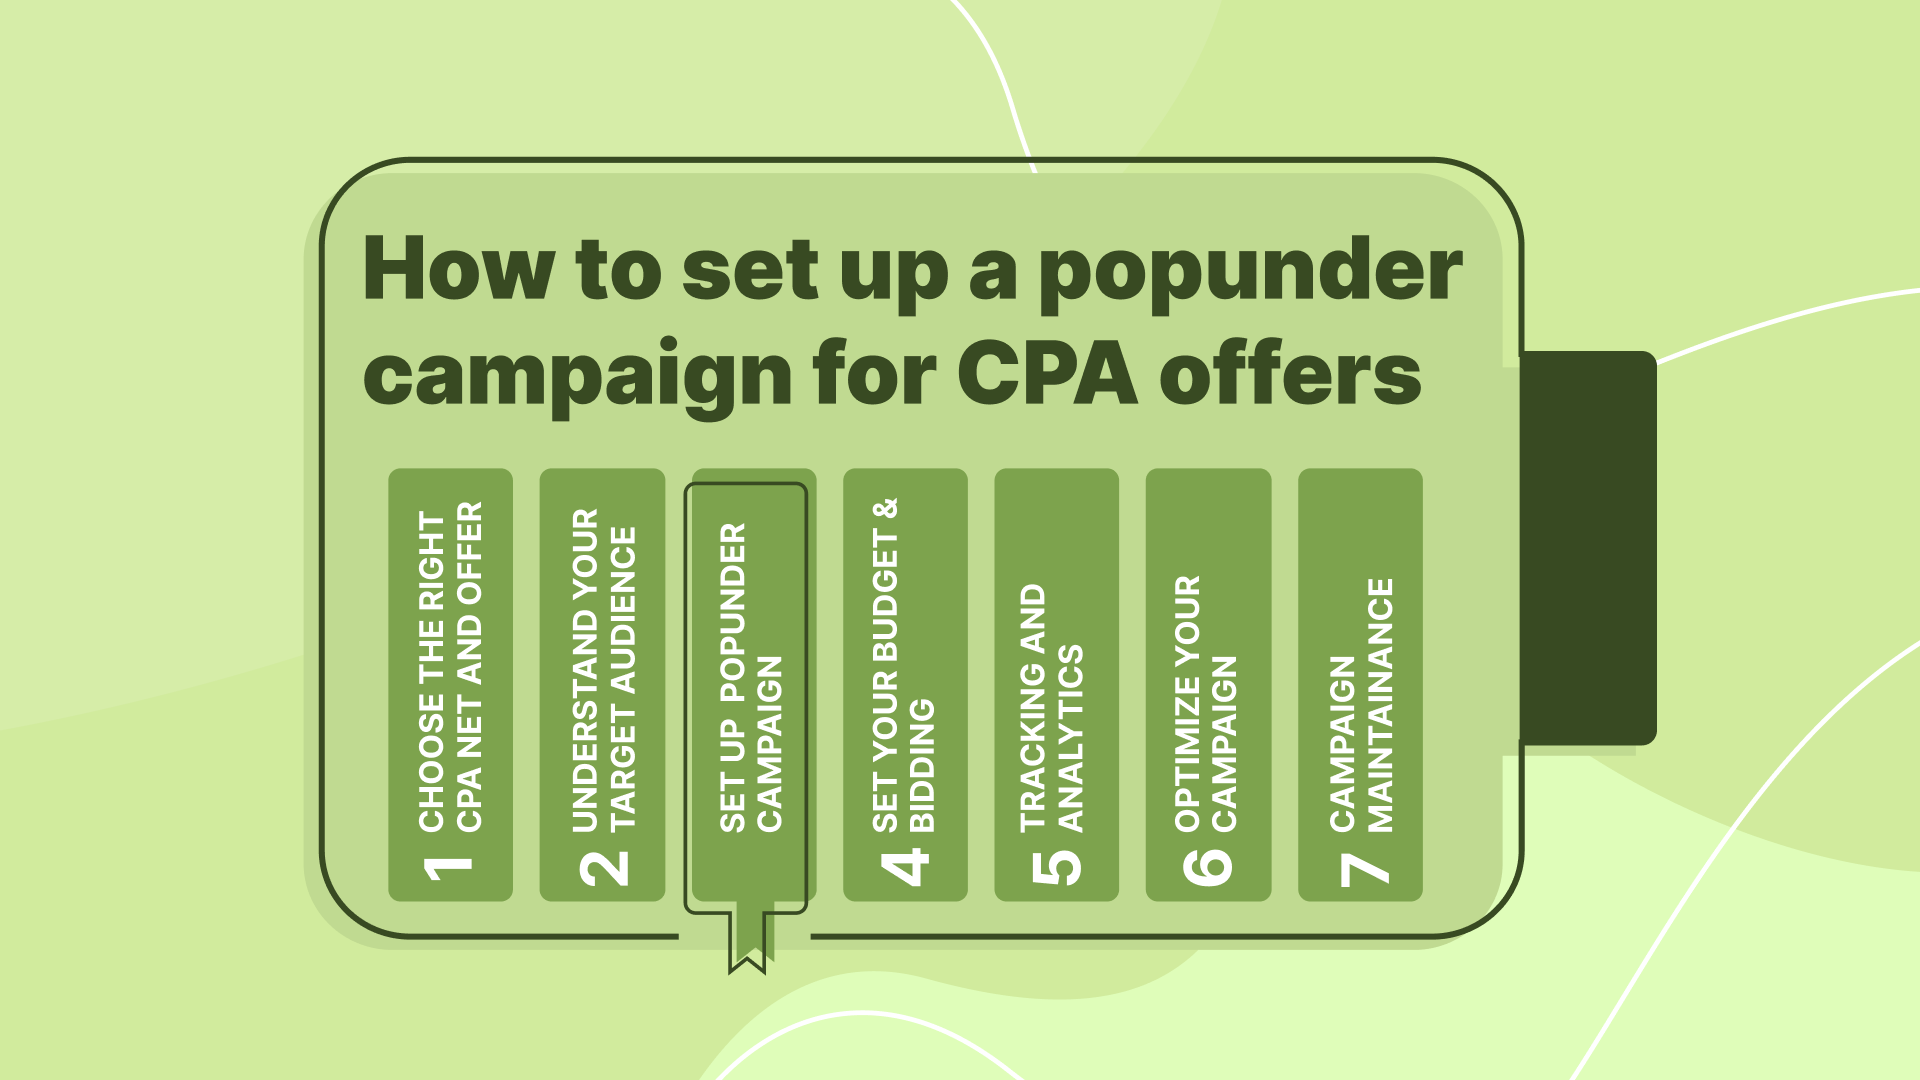 2024's Top CPA Offers for Maximizing Popunder Traffic